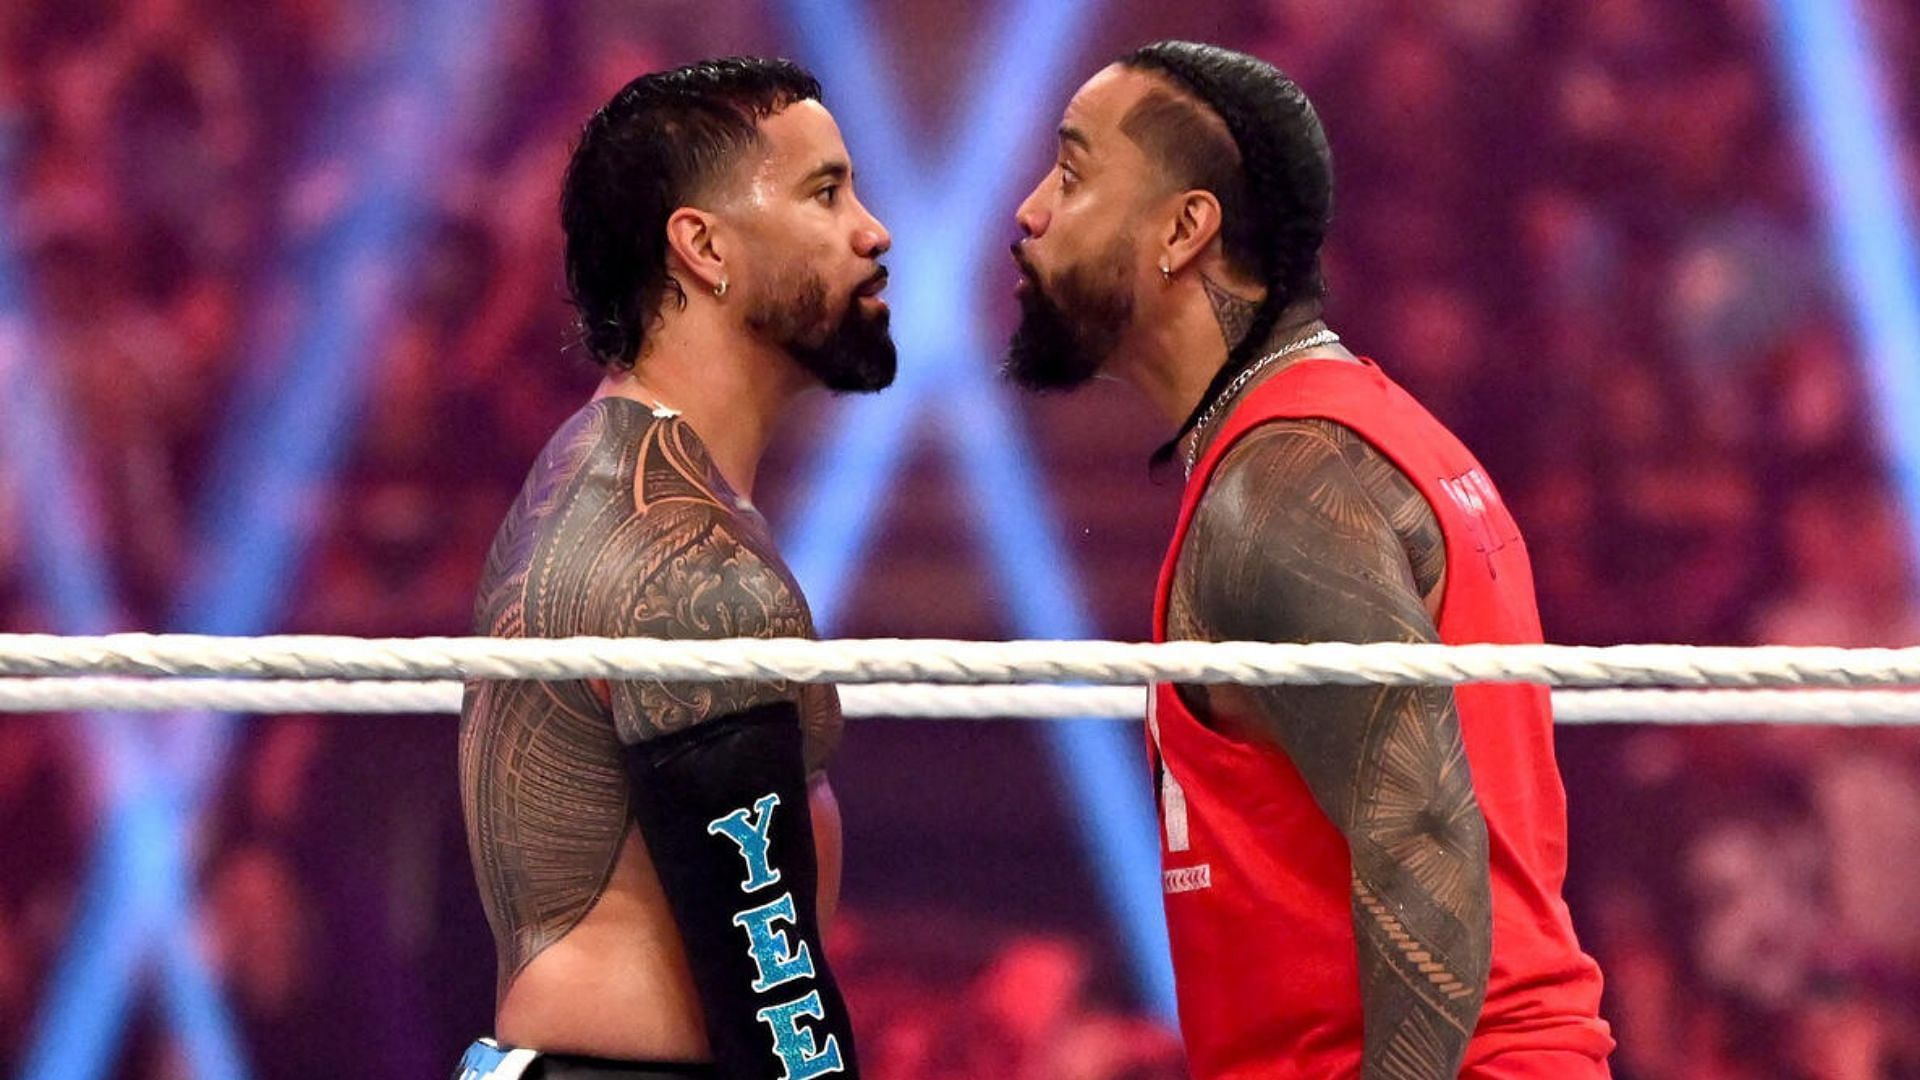 The Usos will be battling each other this weekend. 